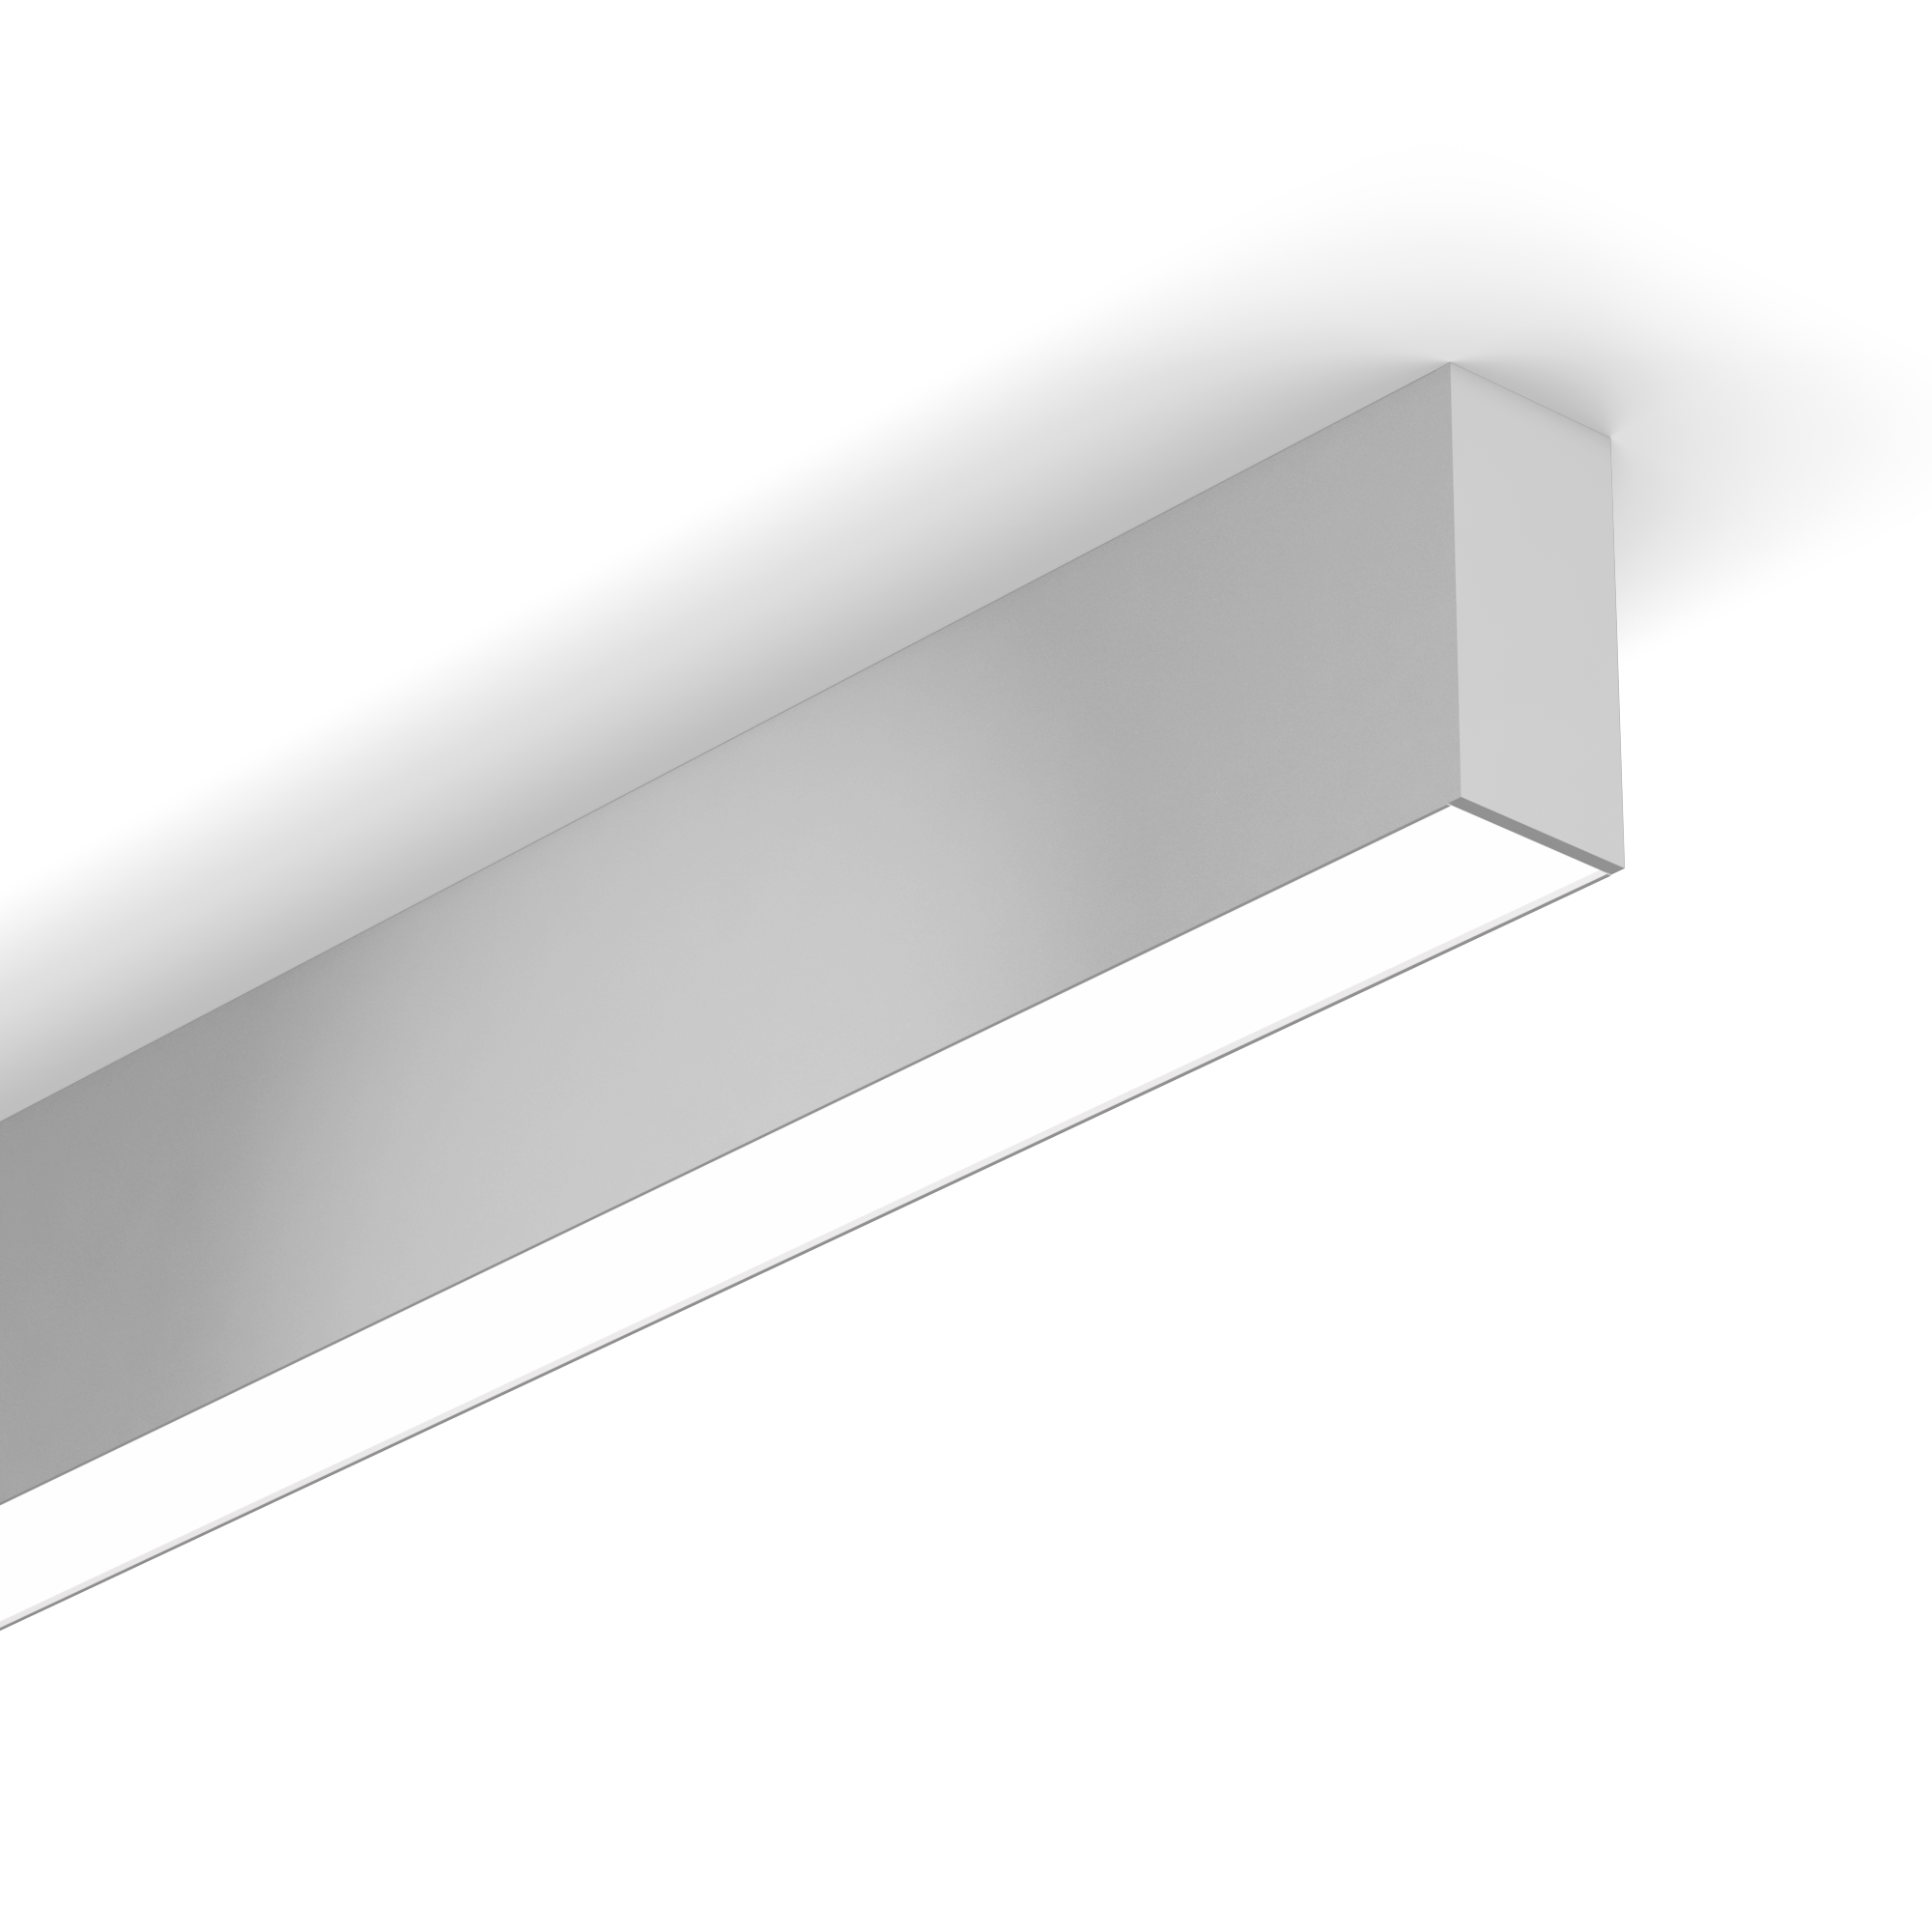 Surface mounted linear with integral on-board driver
MICROBeam Surface is a 1.4” x 2.95” sized linear for surface mounting, typically to a drywall ceiling. MICROBeam Surface includes an integral, field serviceable, on-board driver. MICROBeam Surface brings SmartBeam® capabilities up to a powerful 2000 lumens per foot combined direct and indirect. It’s small size designed to compliment architectural space. MICROBeam Surface is fully field serviceable and can be supplied in continuous runs and a variety of visually appealing shapes.
Typical Applications

 	Offices and co-working spaces
 	Schools, colleges and universities
 	Retail spaces